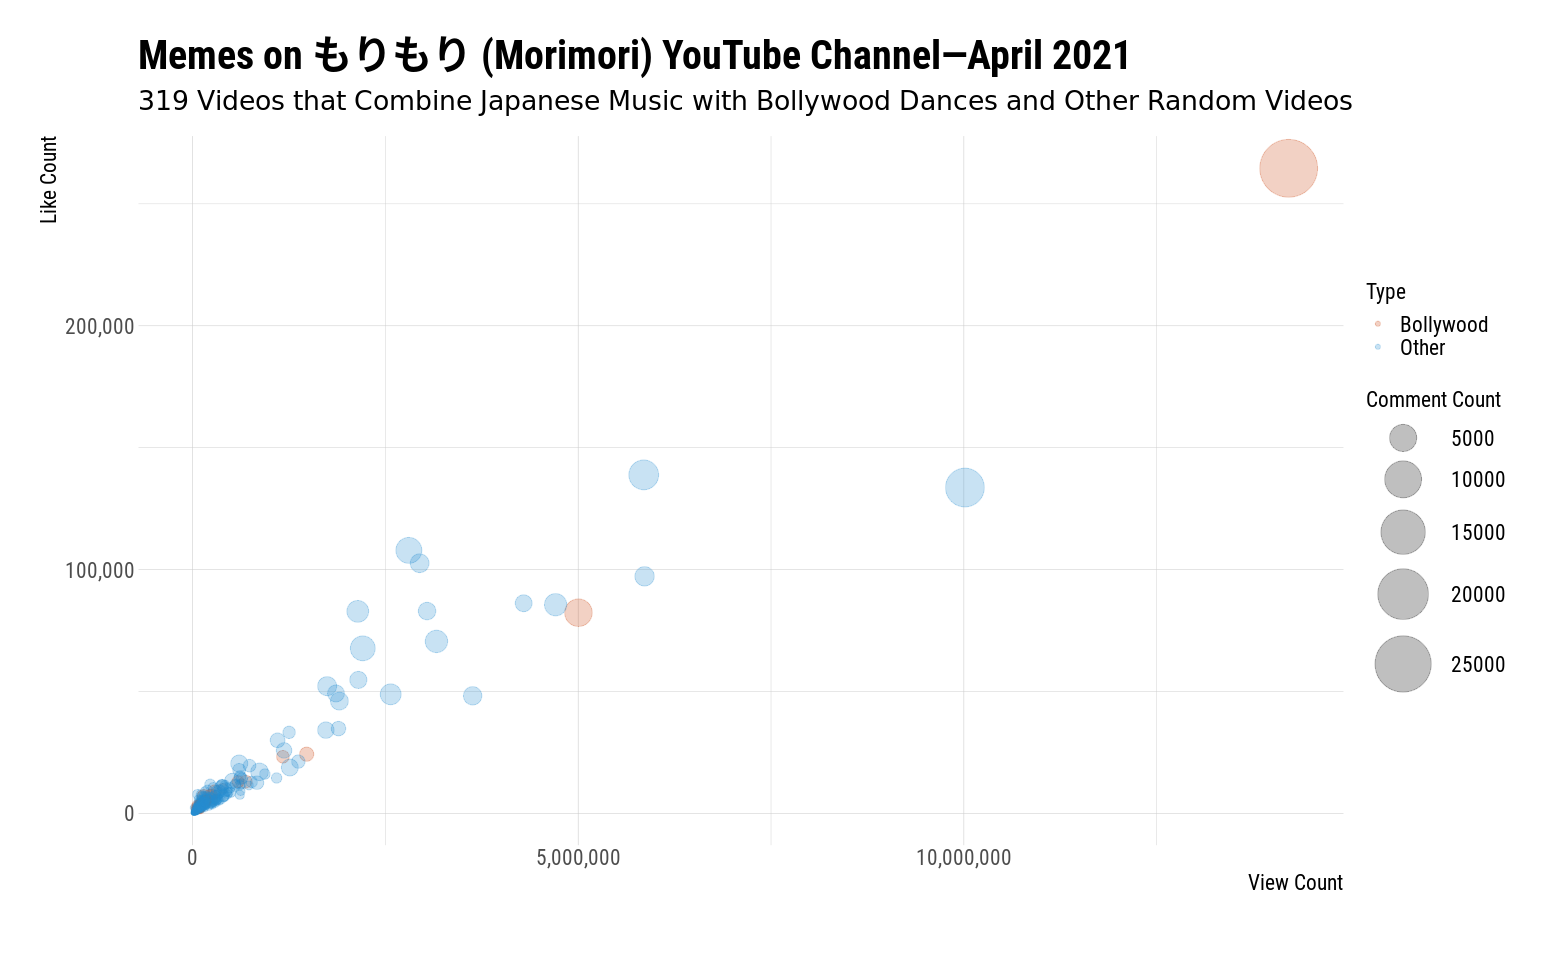 Scatter plot of view counts and like counts of Morimori's videos